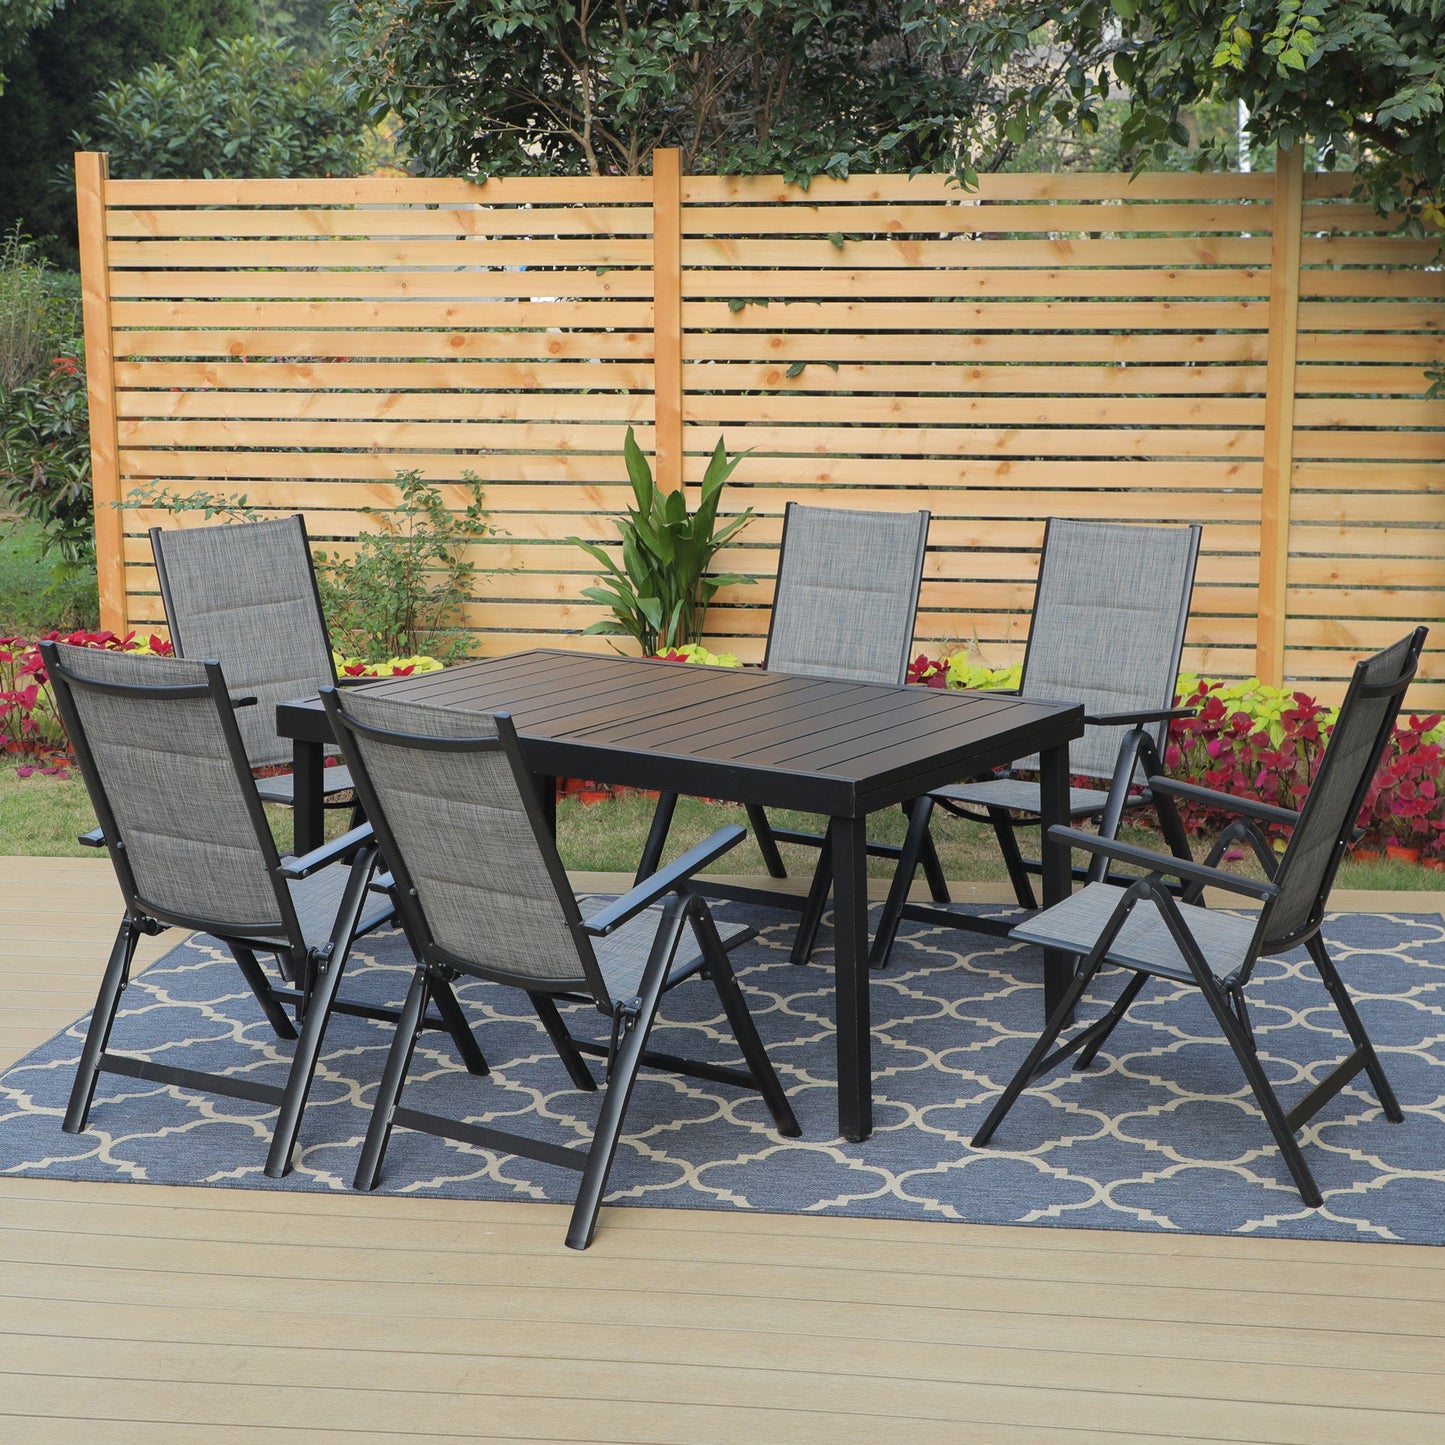 Sophia & William 7 Pieces Patio Dining Set Folding Chairs & Extendable Table